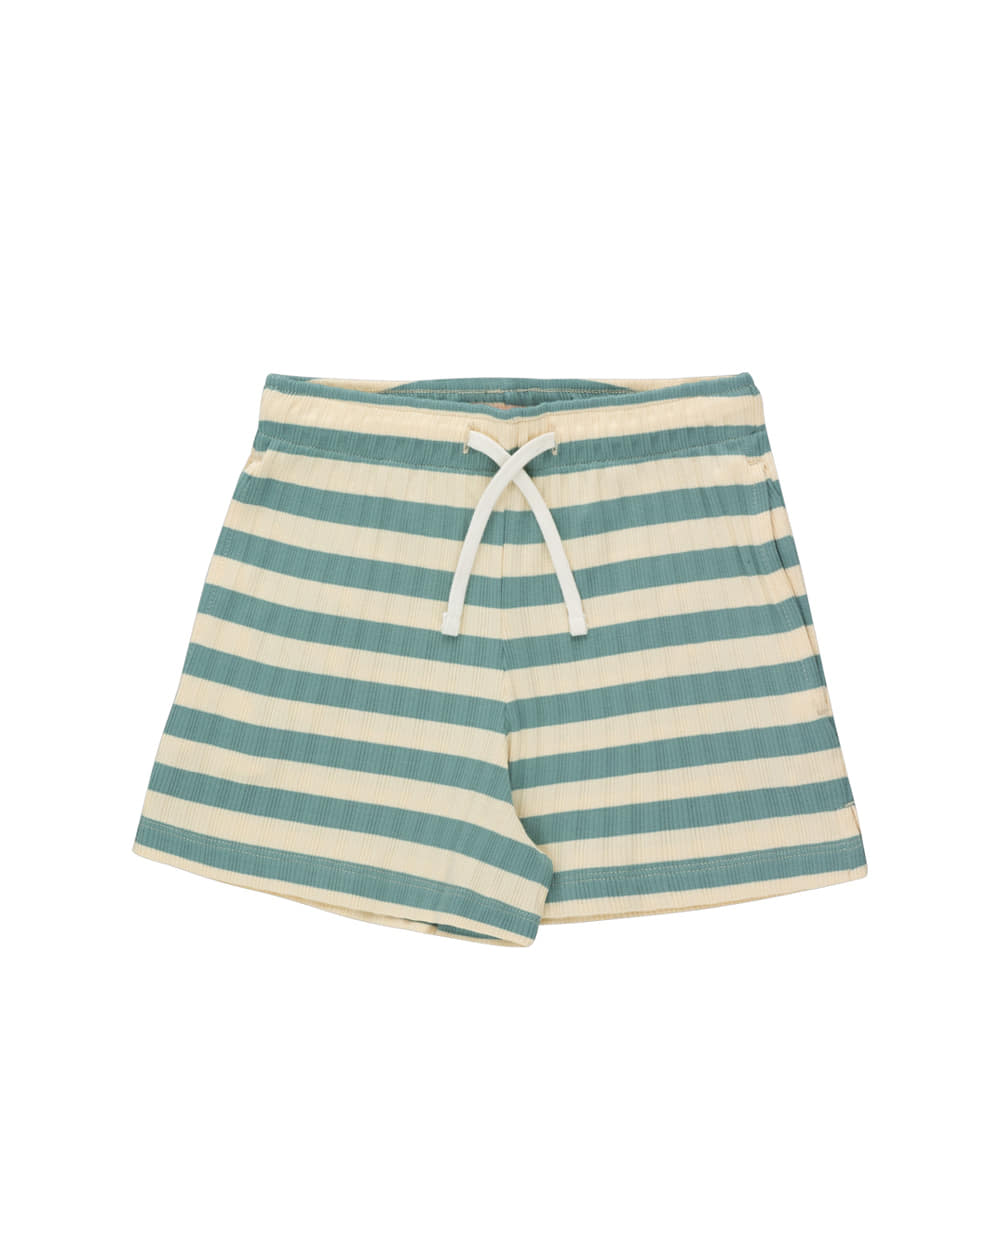 [TINYCOTTONS]STRIPES SHORT/pastel yellow/light teal [4Y,8Y]